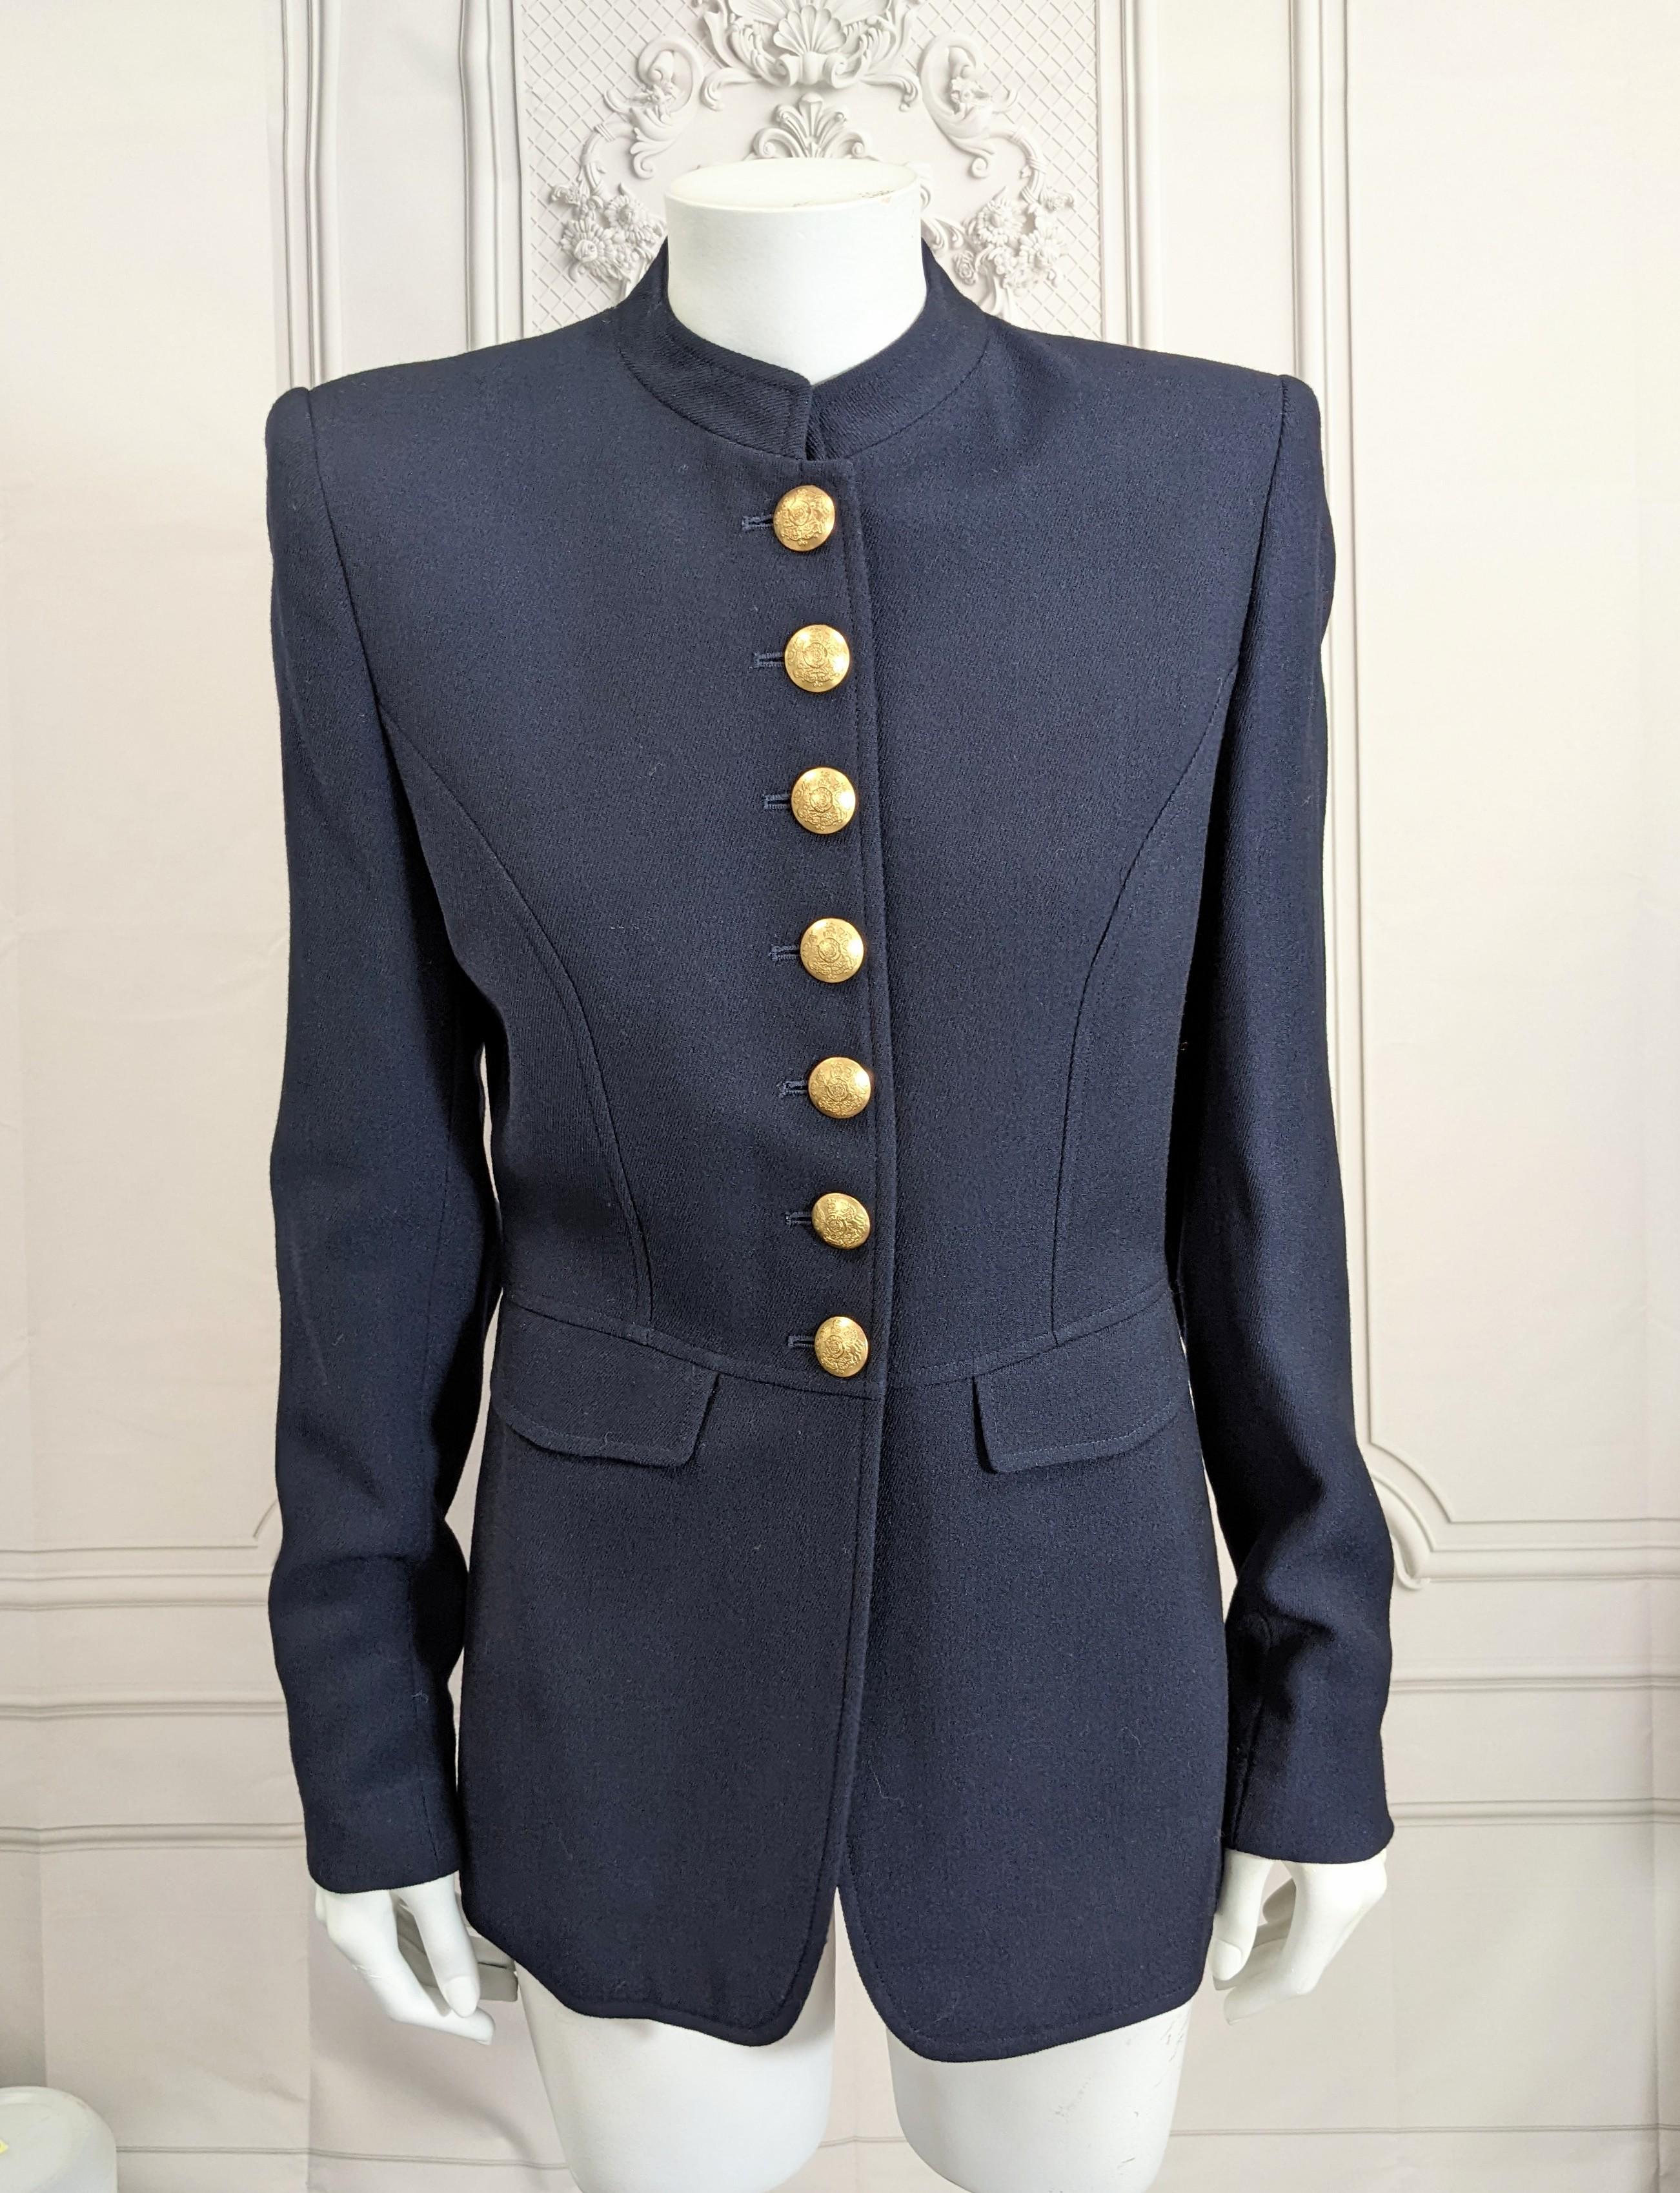 Ralph Lauren Military Style Jacket in navy wool twill with band collar and gilt buttons. Elongated slim cut with princess seaming, functioning pockets at waist level. Bold shoulders with button decorated pleats and flap on back. Beautifully tailored